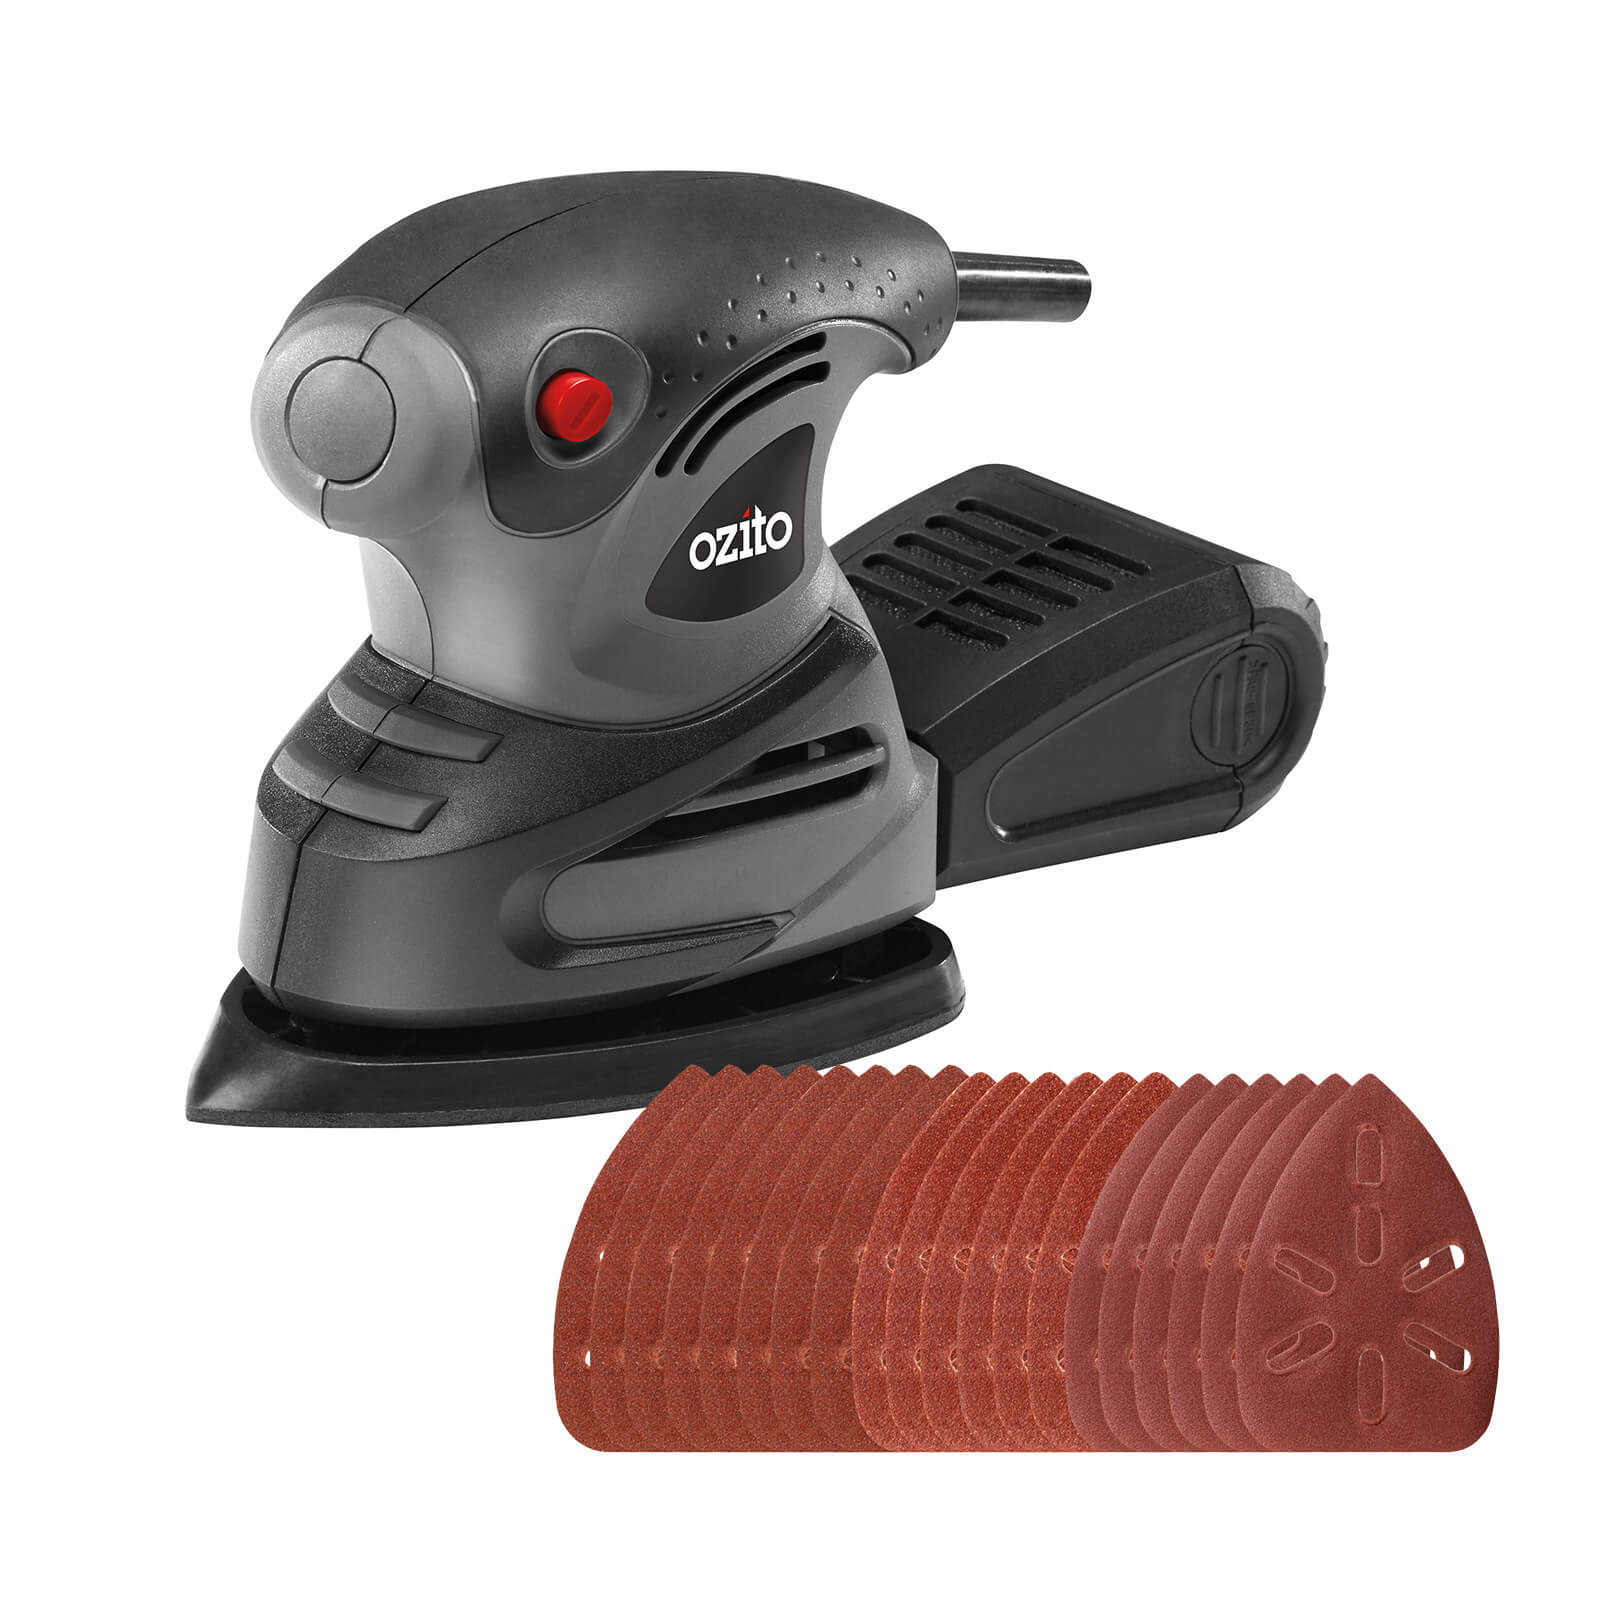 Ozito by Einhell 180W Detail Sander with 20 Sanding Sheets